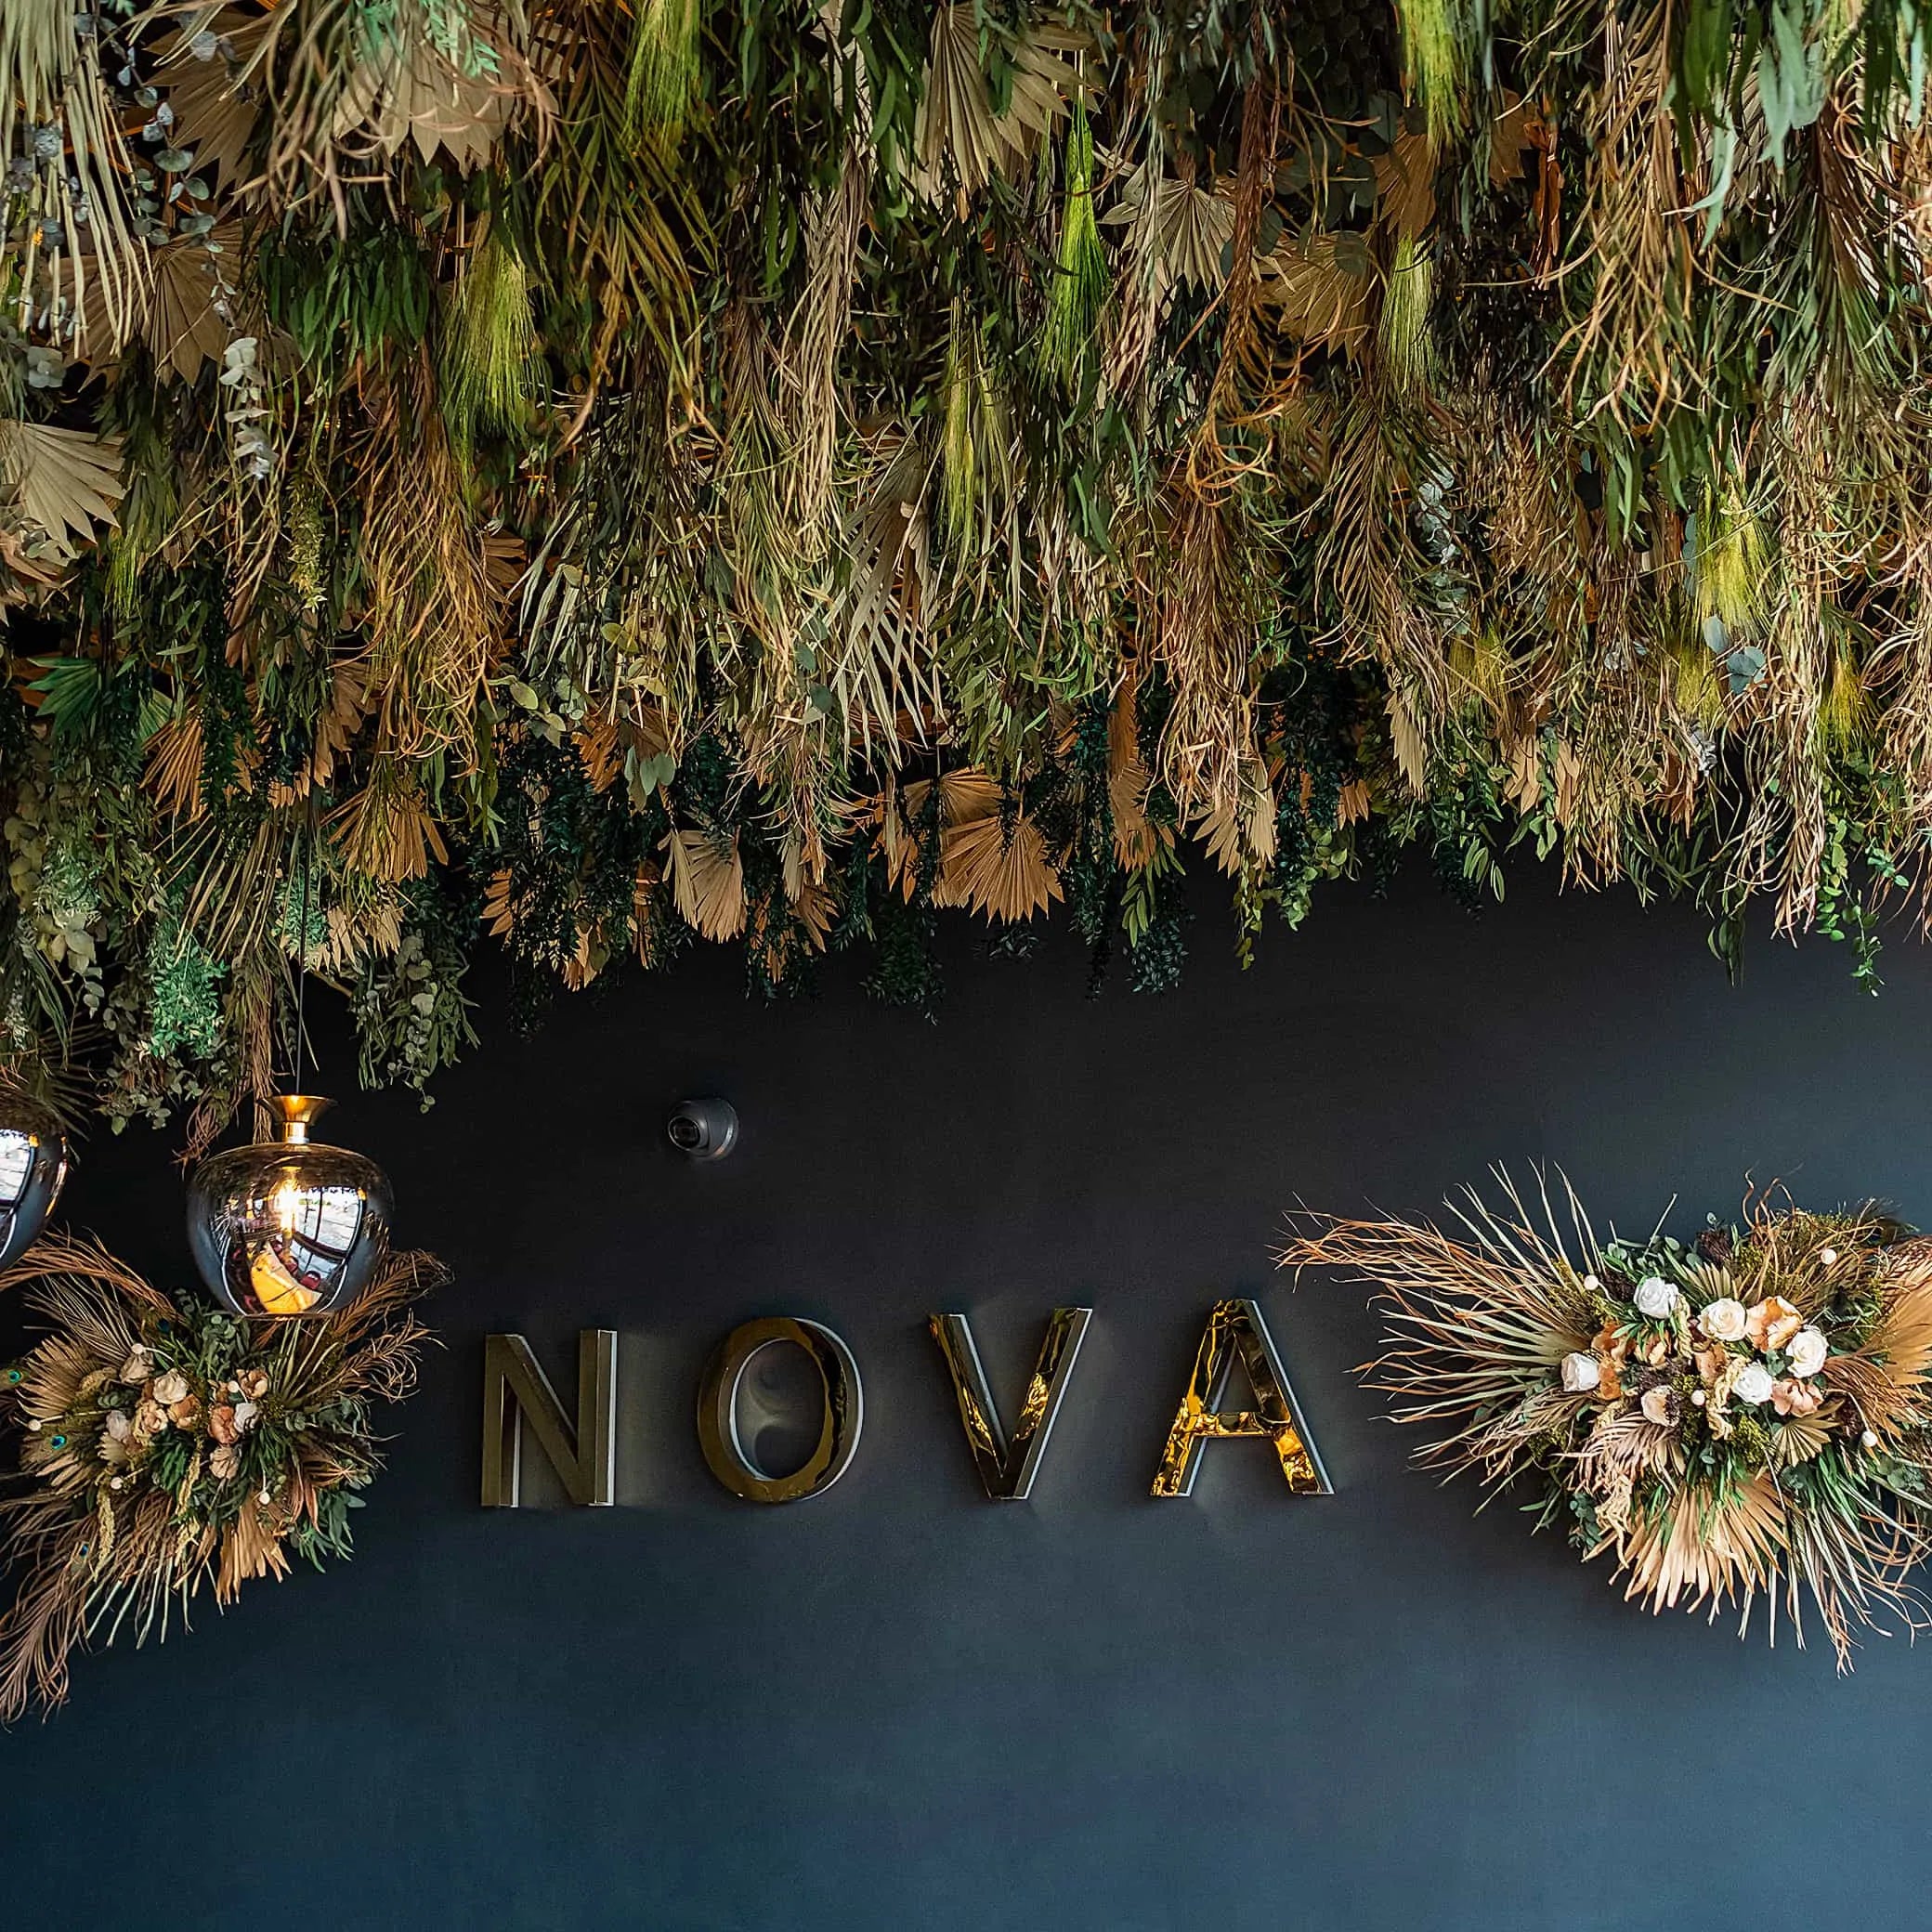 Event florist Amaranté London brought the beauty of the outside in with naturally preserved green floral installations to Nova’s London restaurant